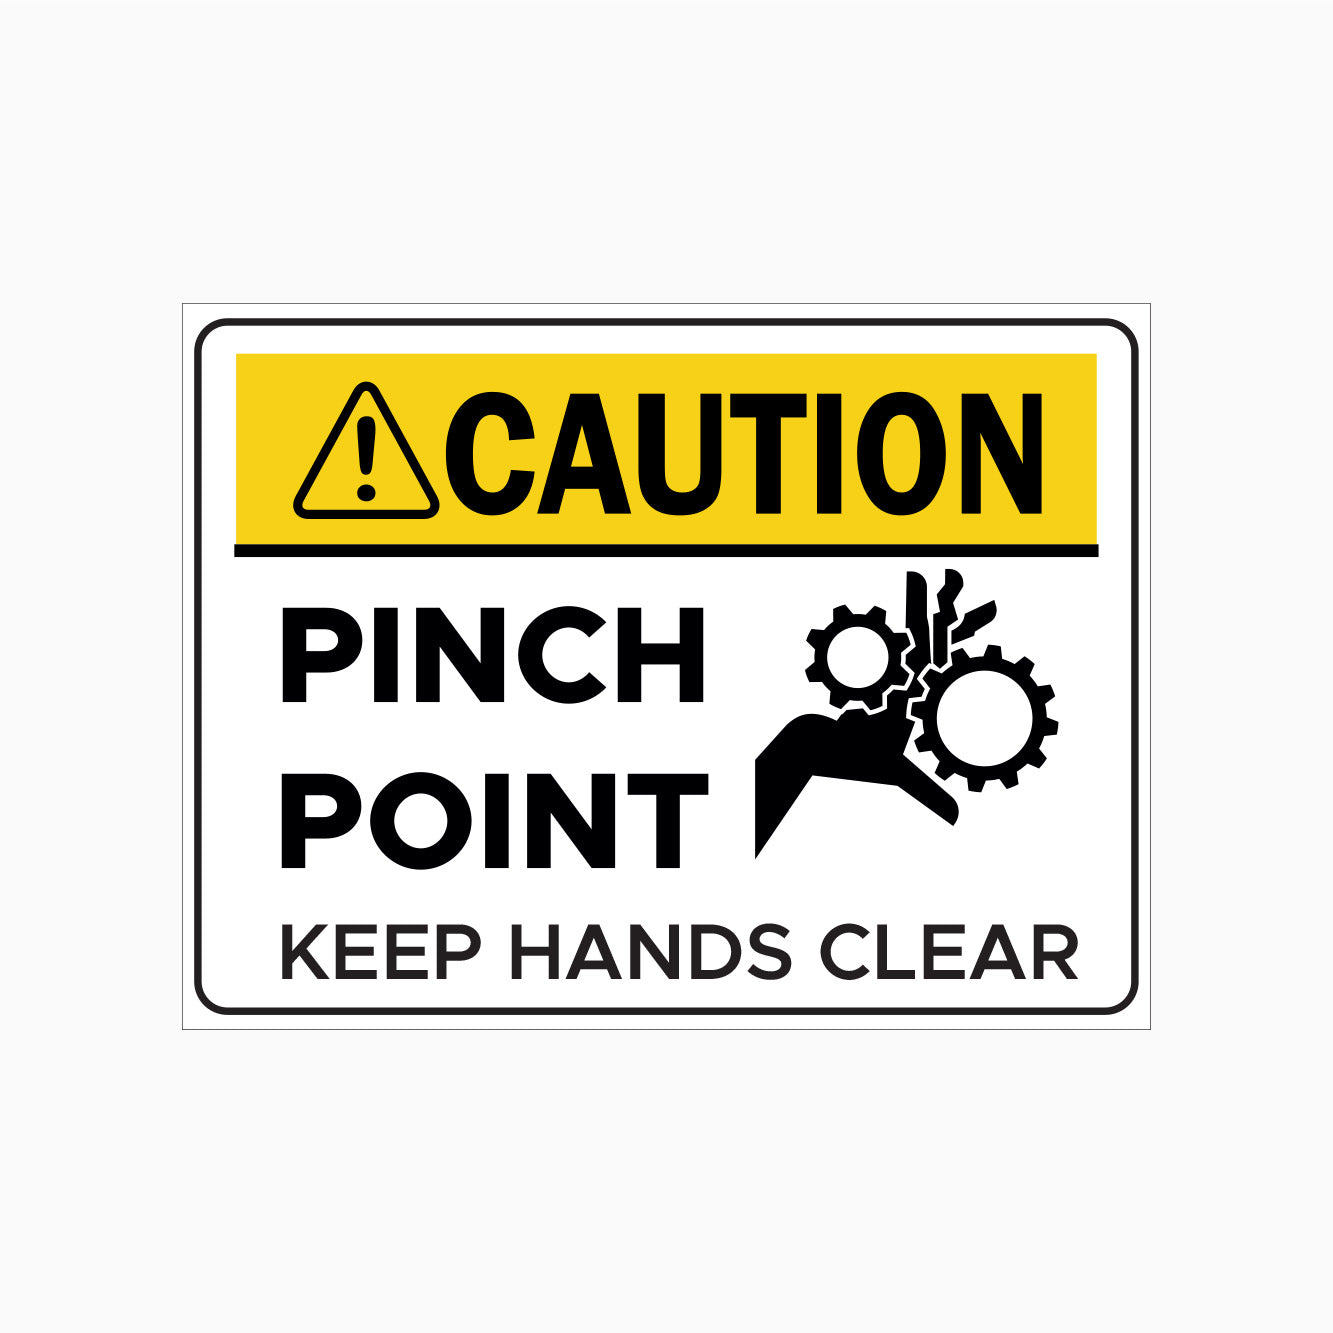 PINCH POINT SIGN - KEEP HANDS CLEAR SIGN - CAUTION SIGN